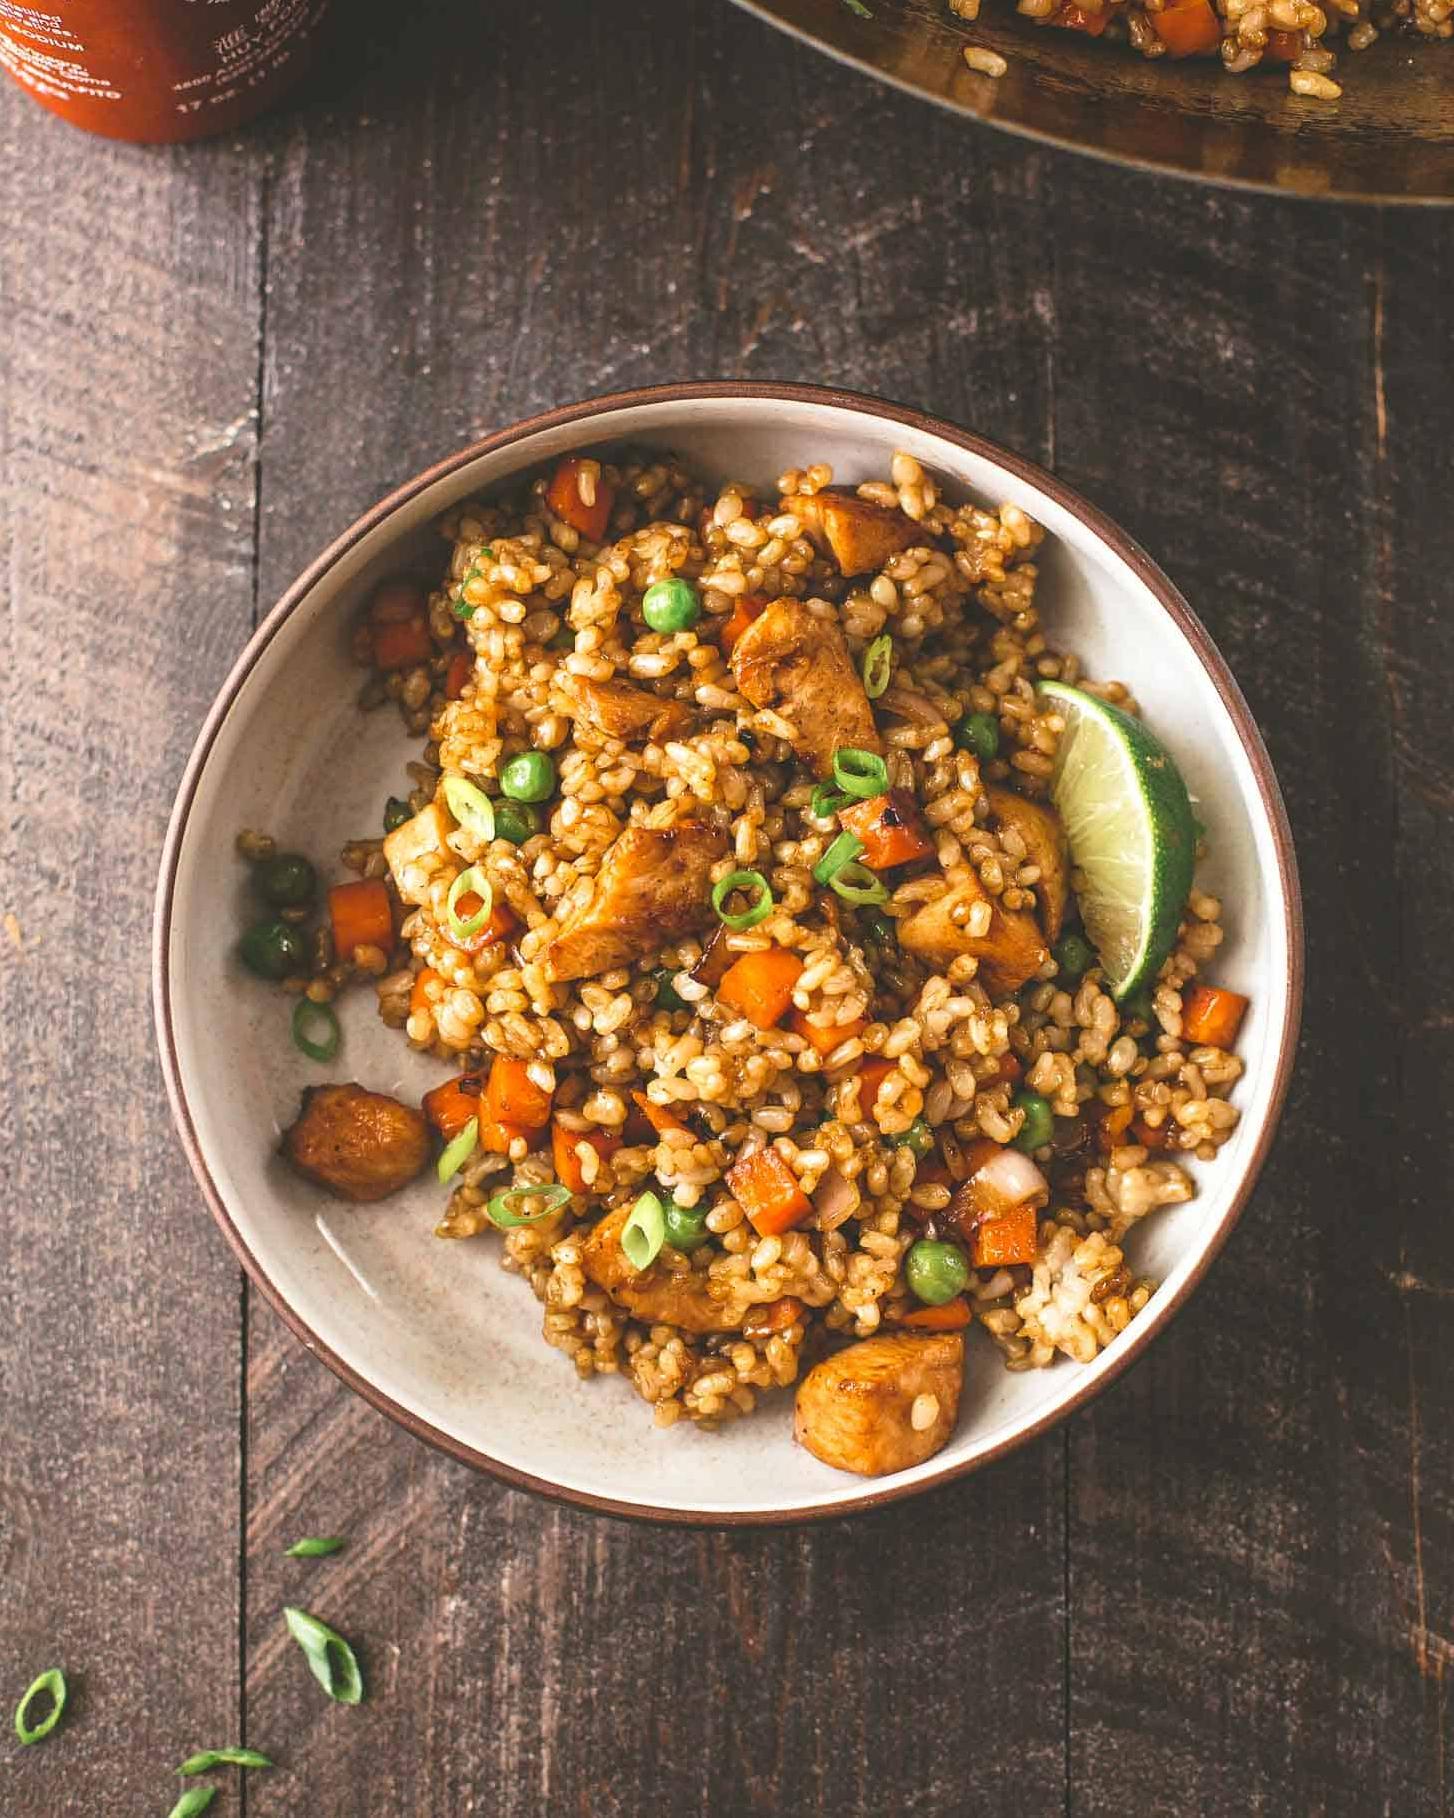  Get a taste of the South with this easy-to-follow honey rice recipe.